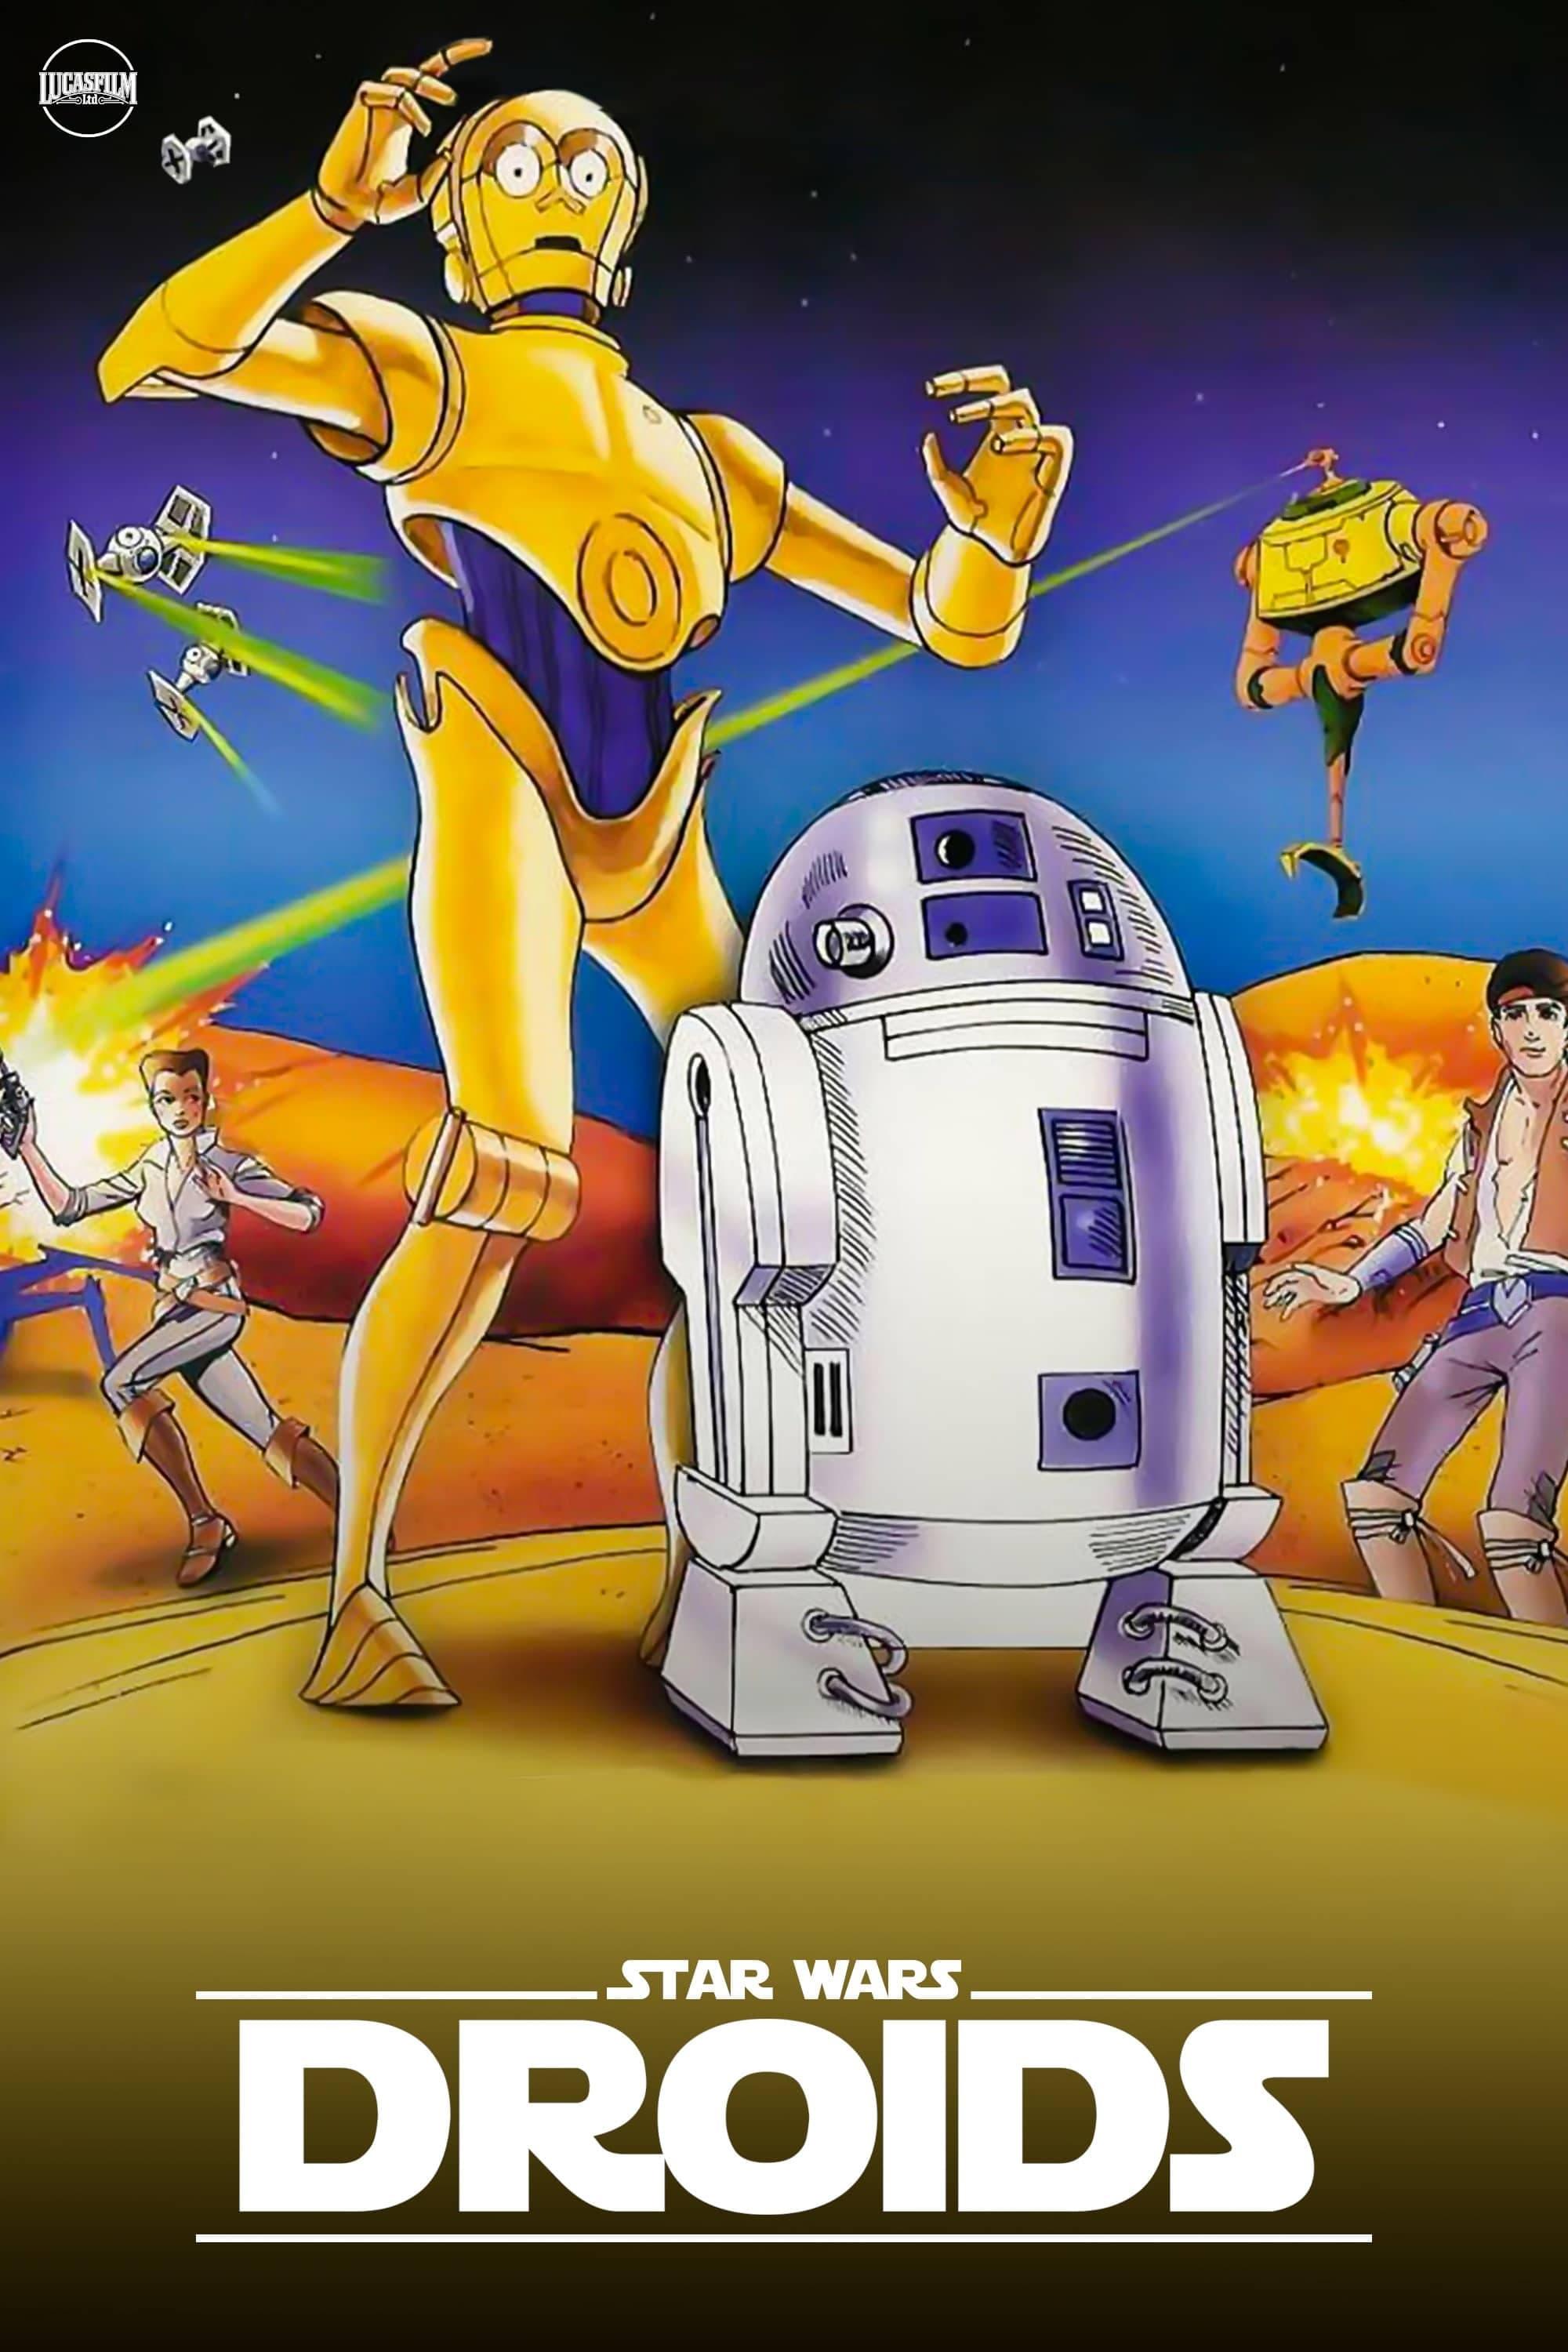 Star Wars: Droids poster